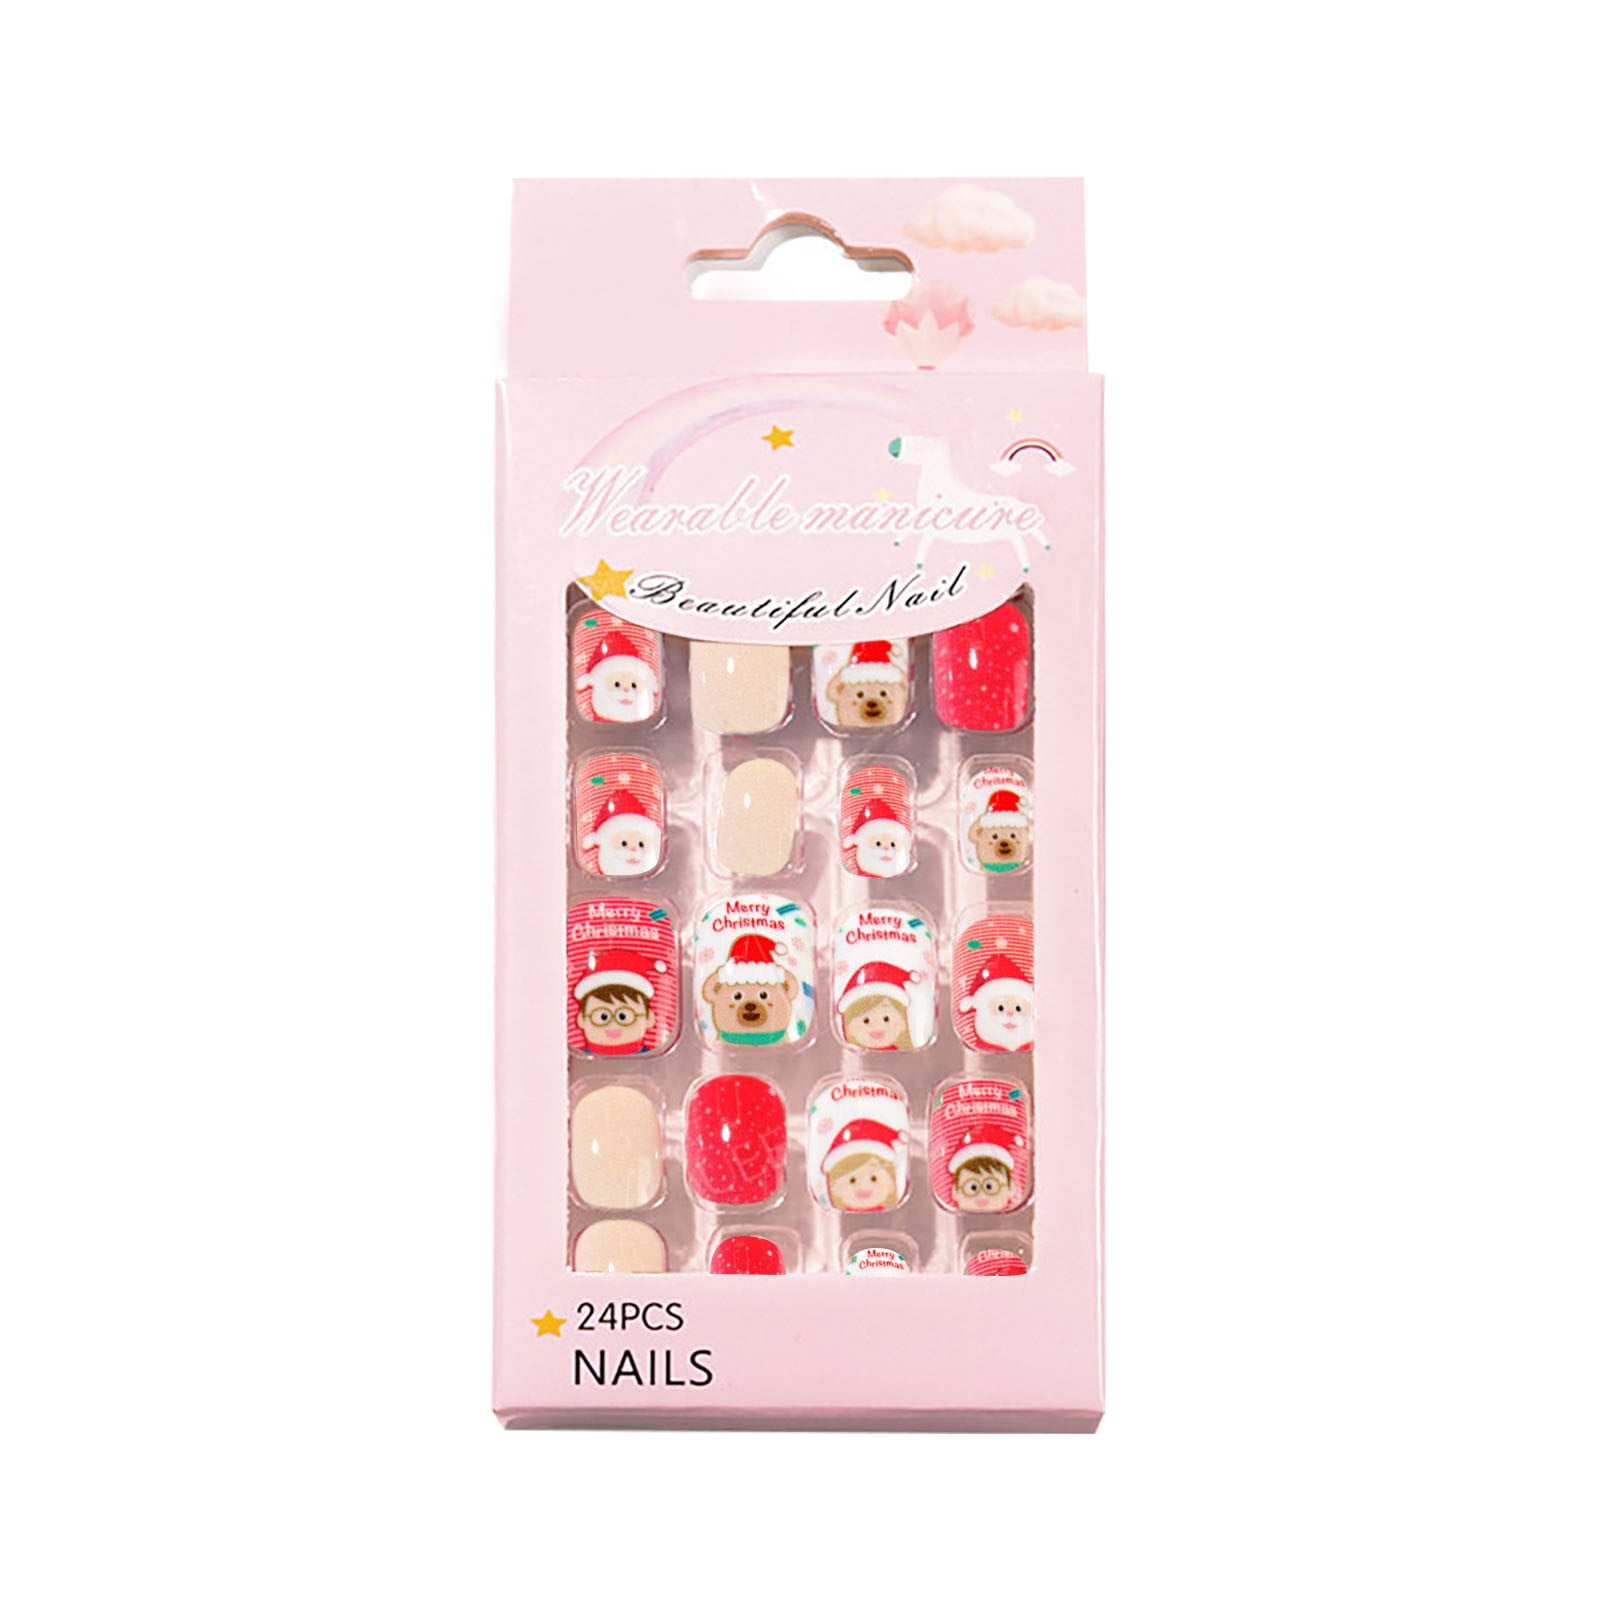 HSMQHJWE Nail Gift Sets for Girls Ages 7-12 Self Polish Art Toe Wraps  Stickers Adhesive Nail Tips Nail Tools Toe Nail Wraps for Women 